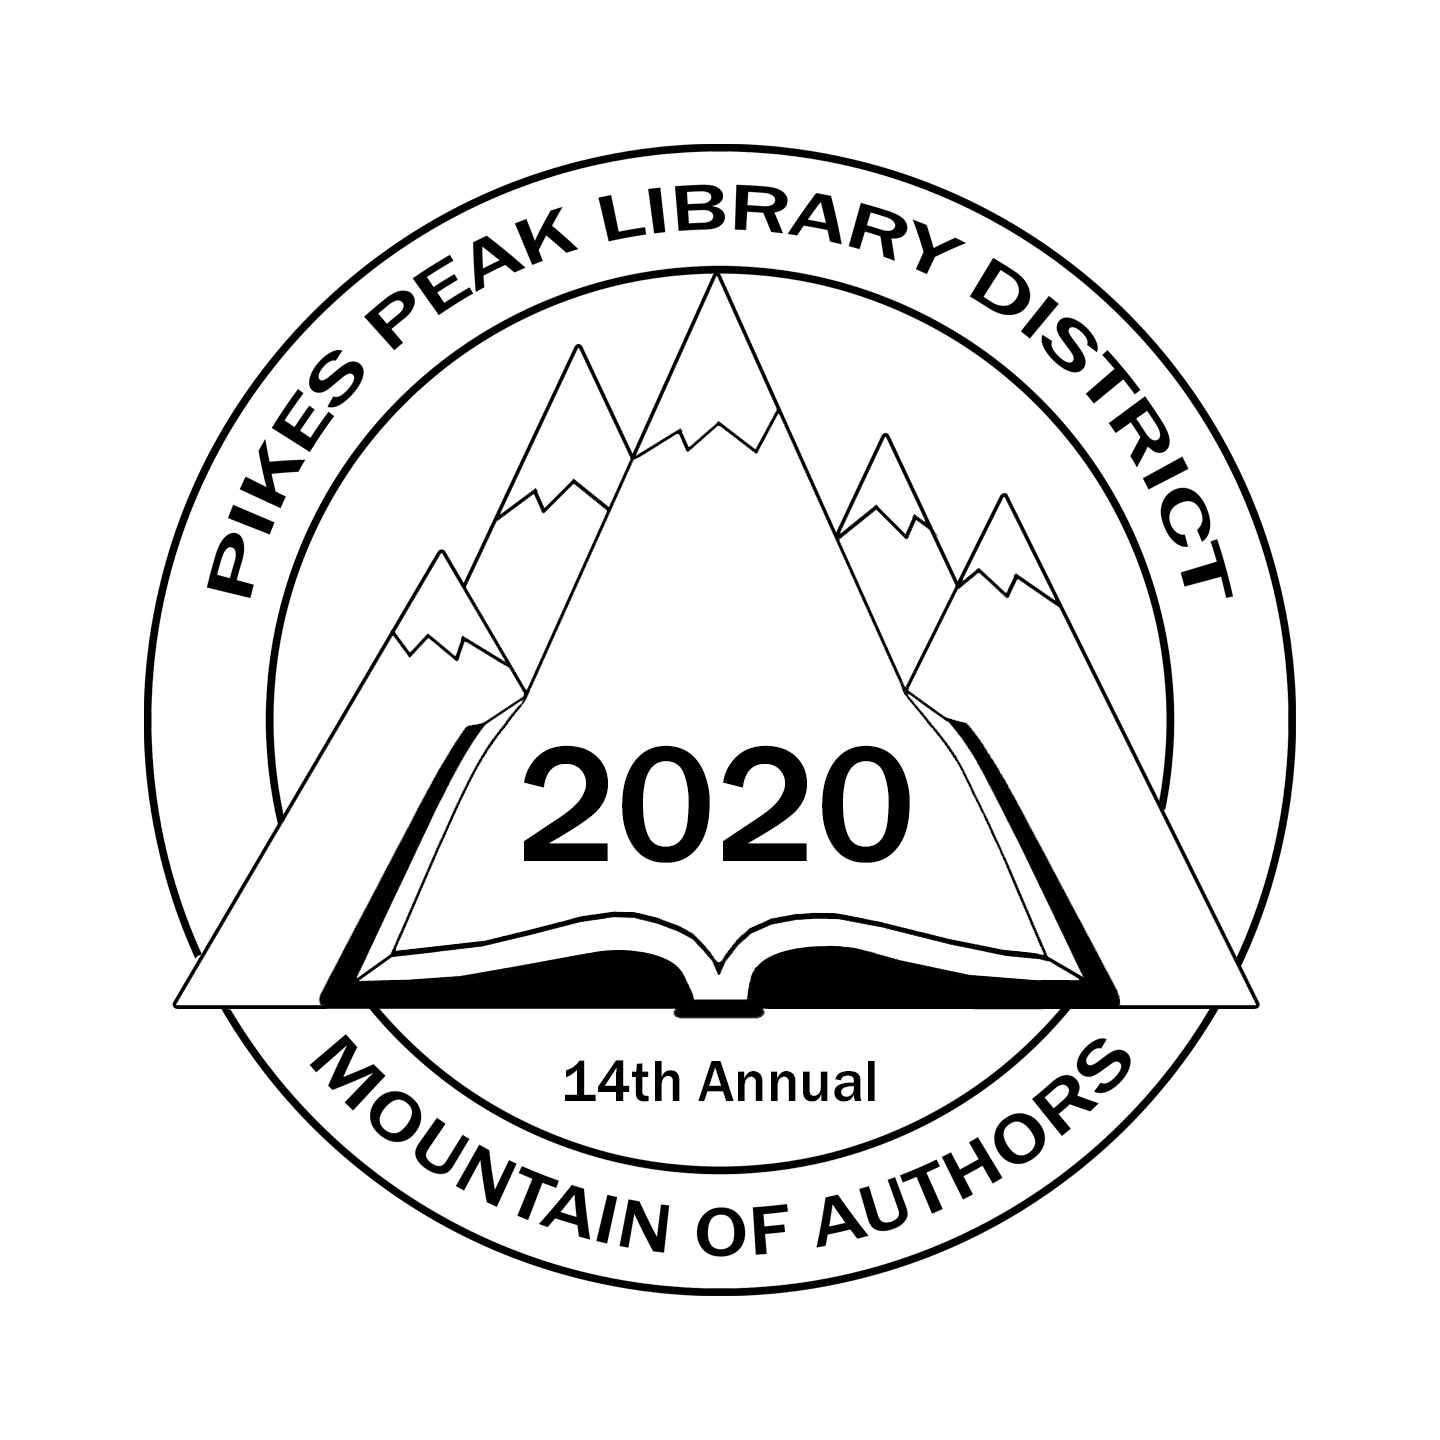 PPLD MOUNTAIN OF AUTHORS